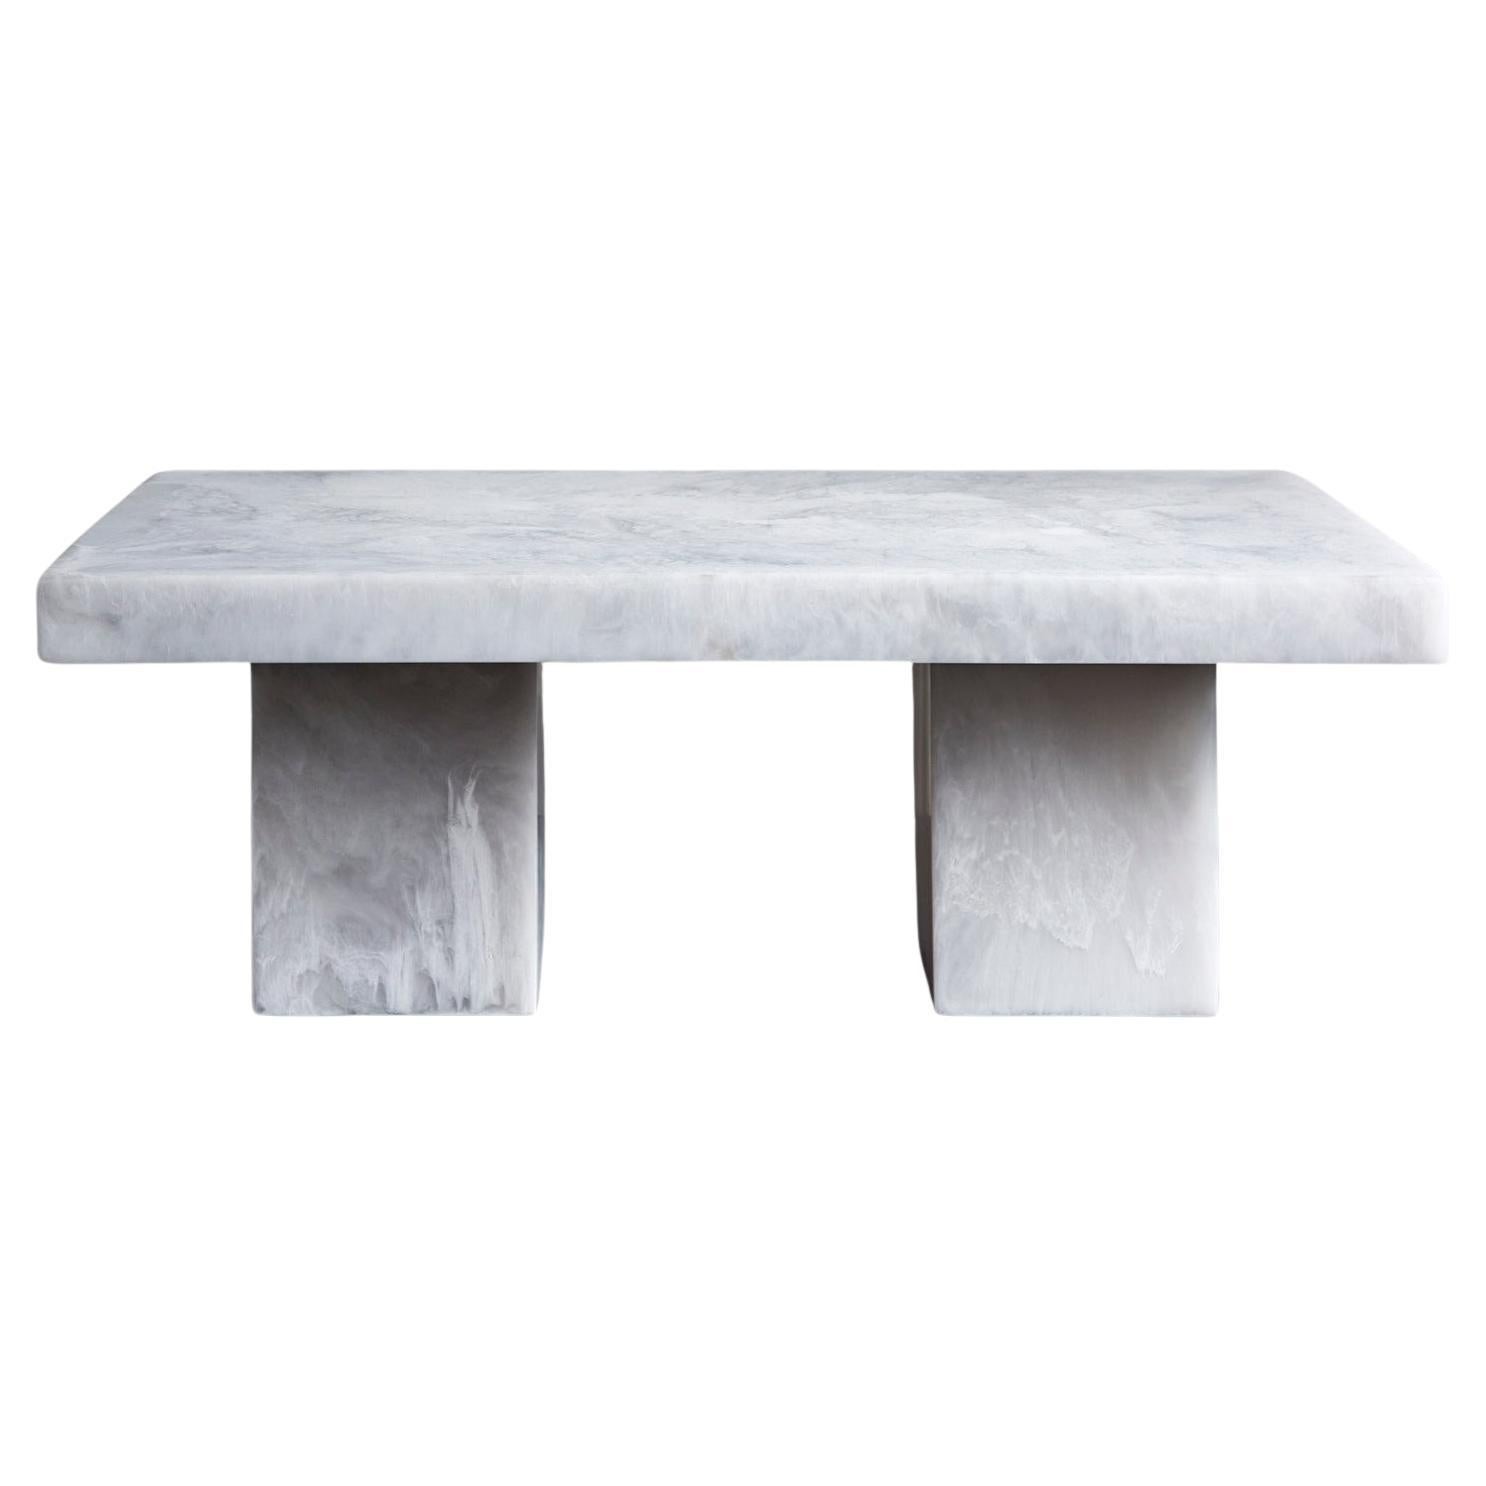 Studio Sturdy Lions Coffee Table – White Marble Resin